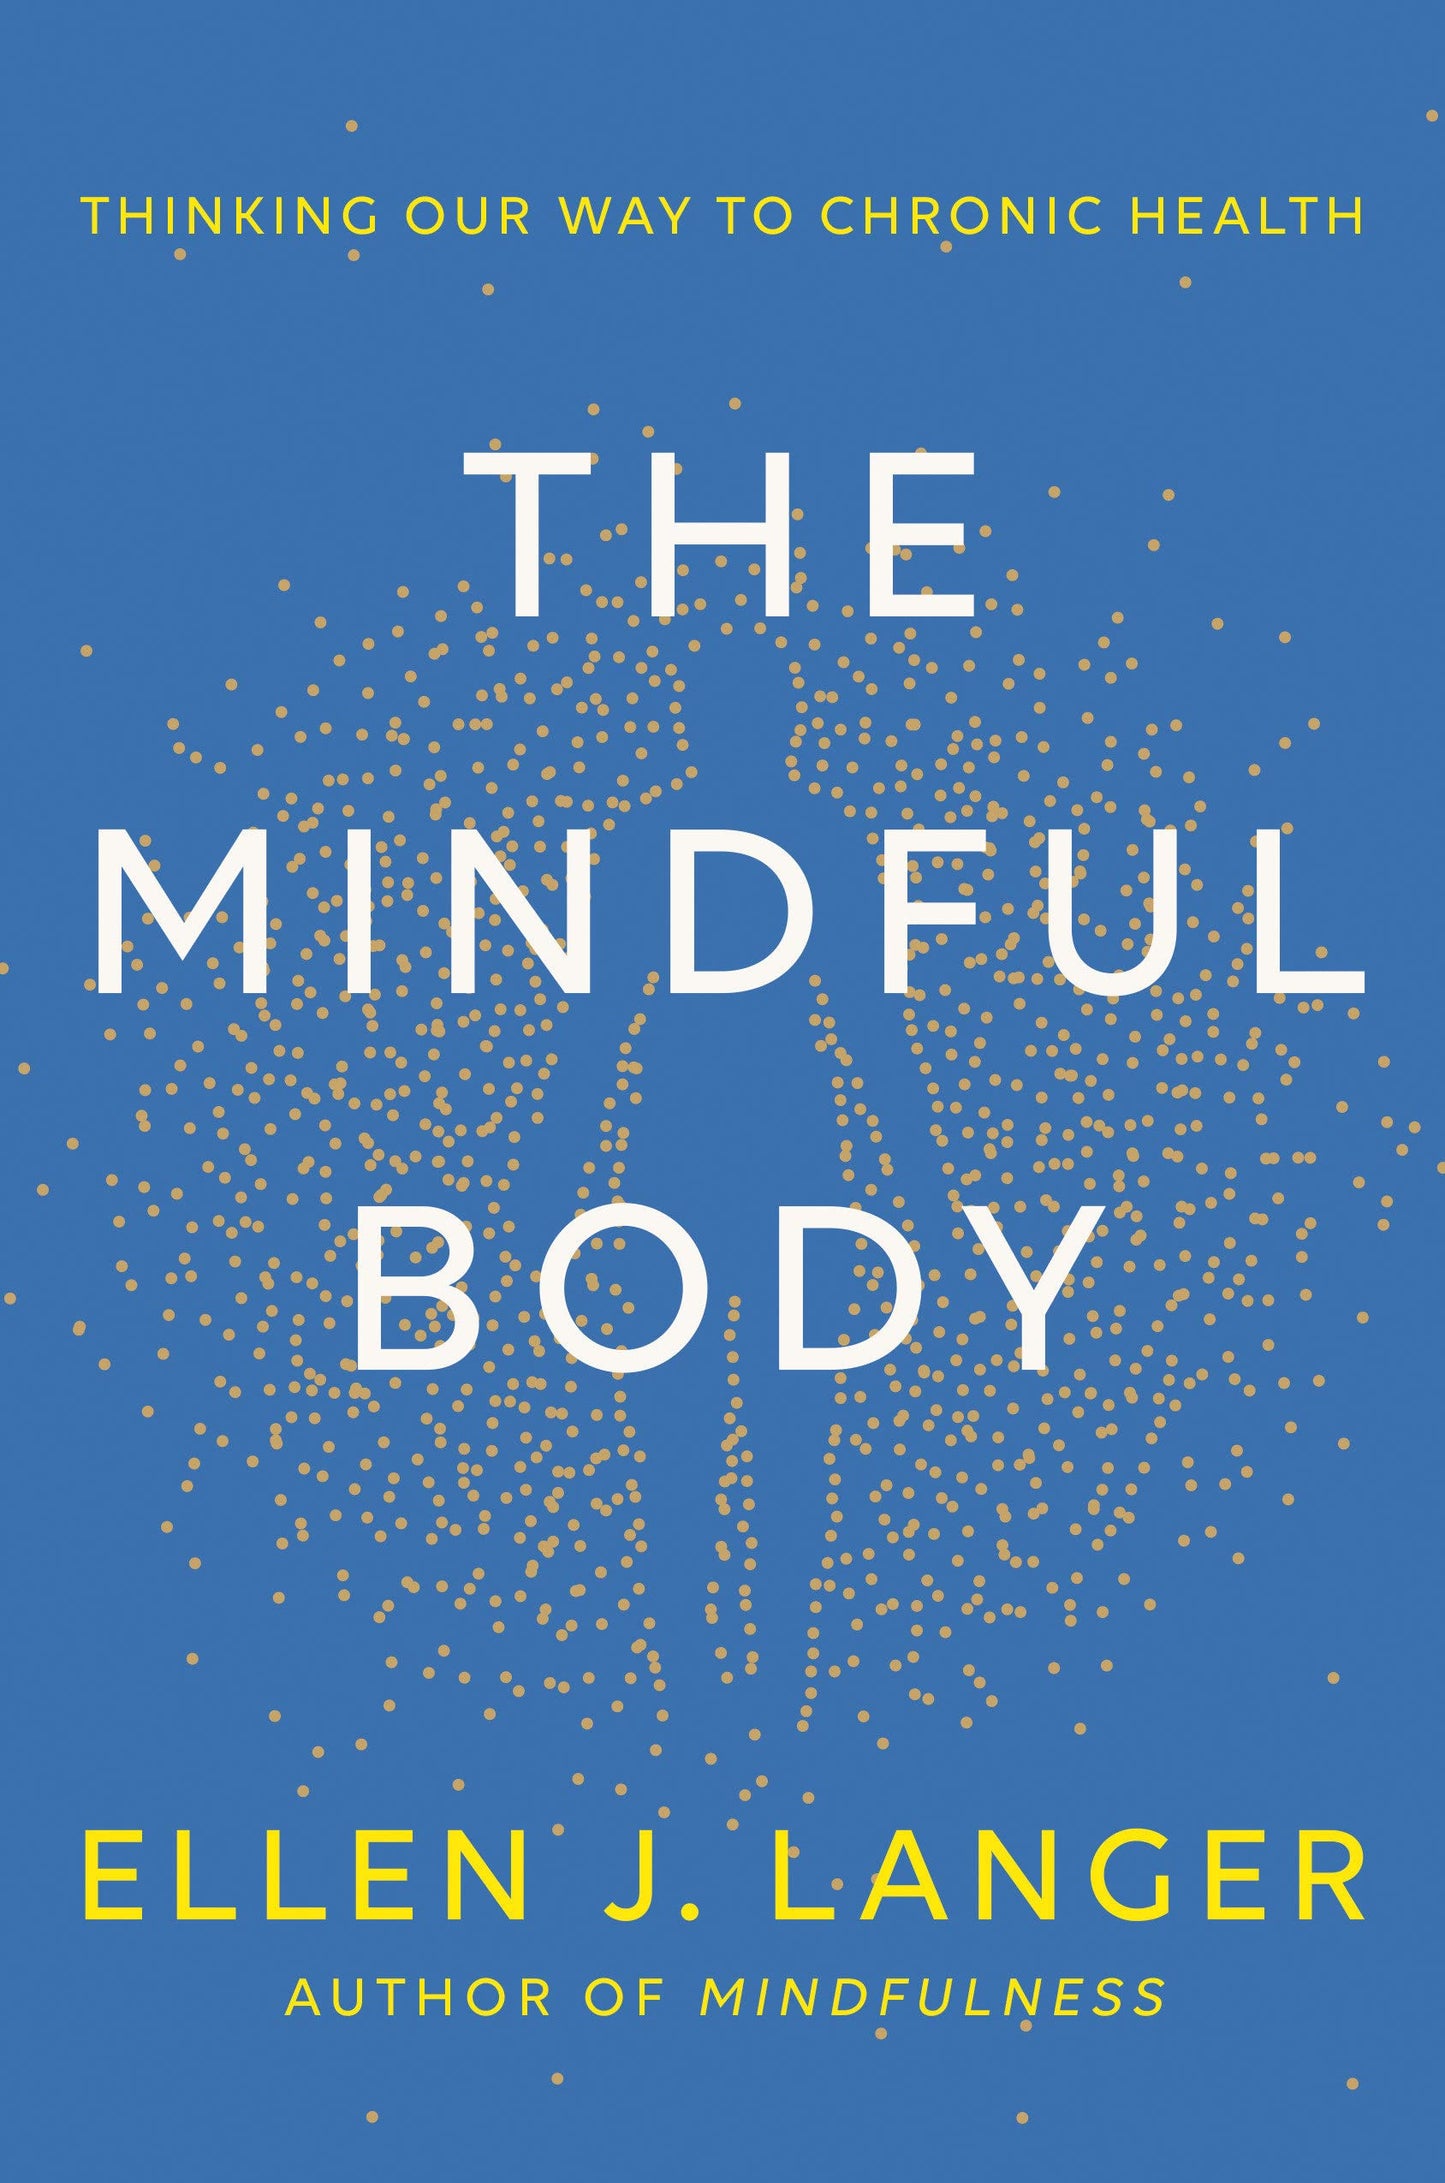 Mindful Body: Thinking Our Way to Chronic Health